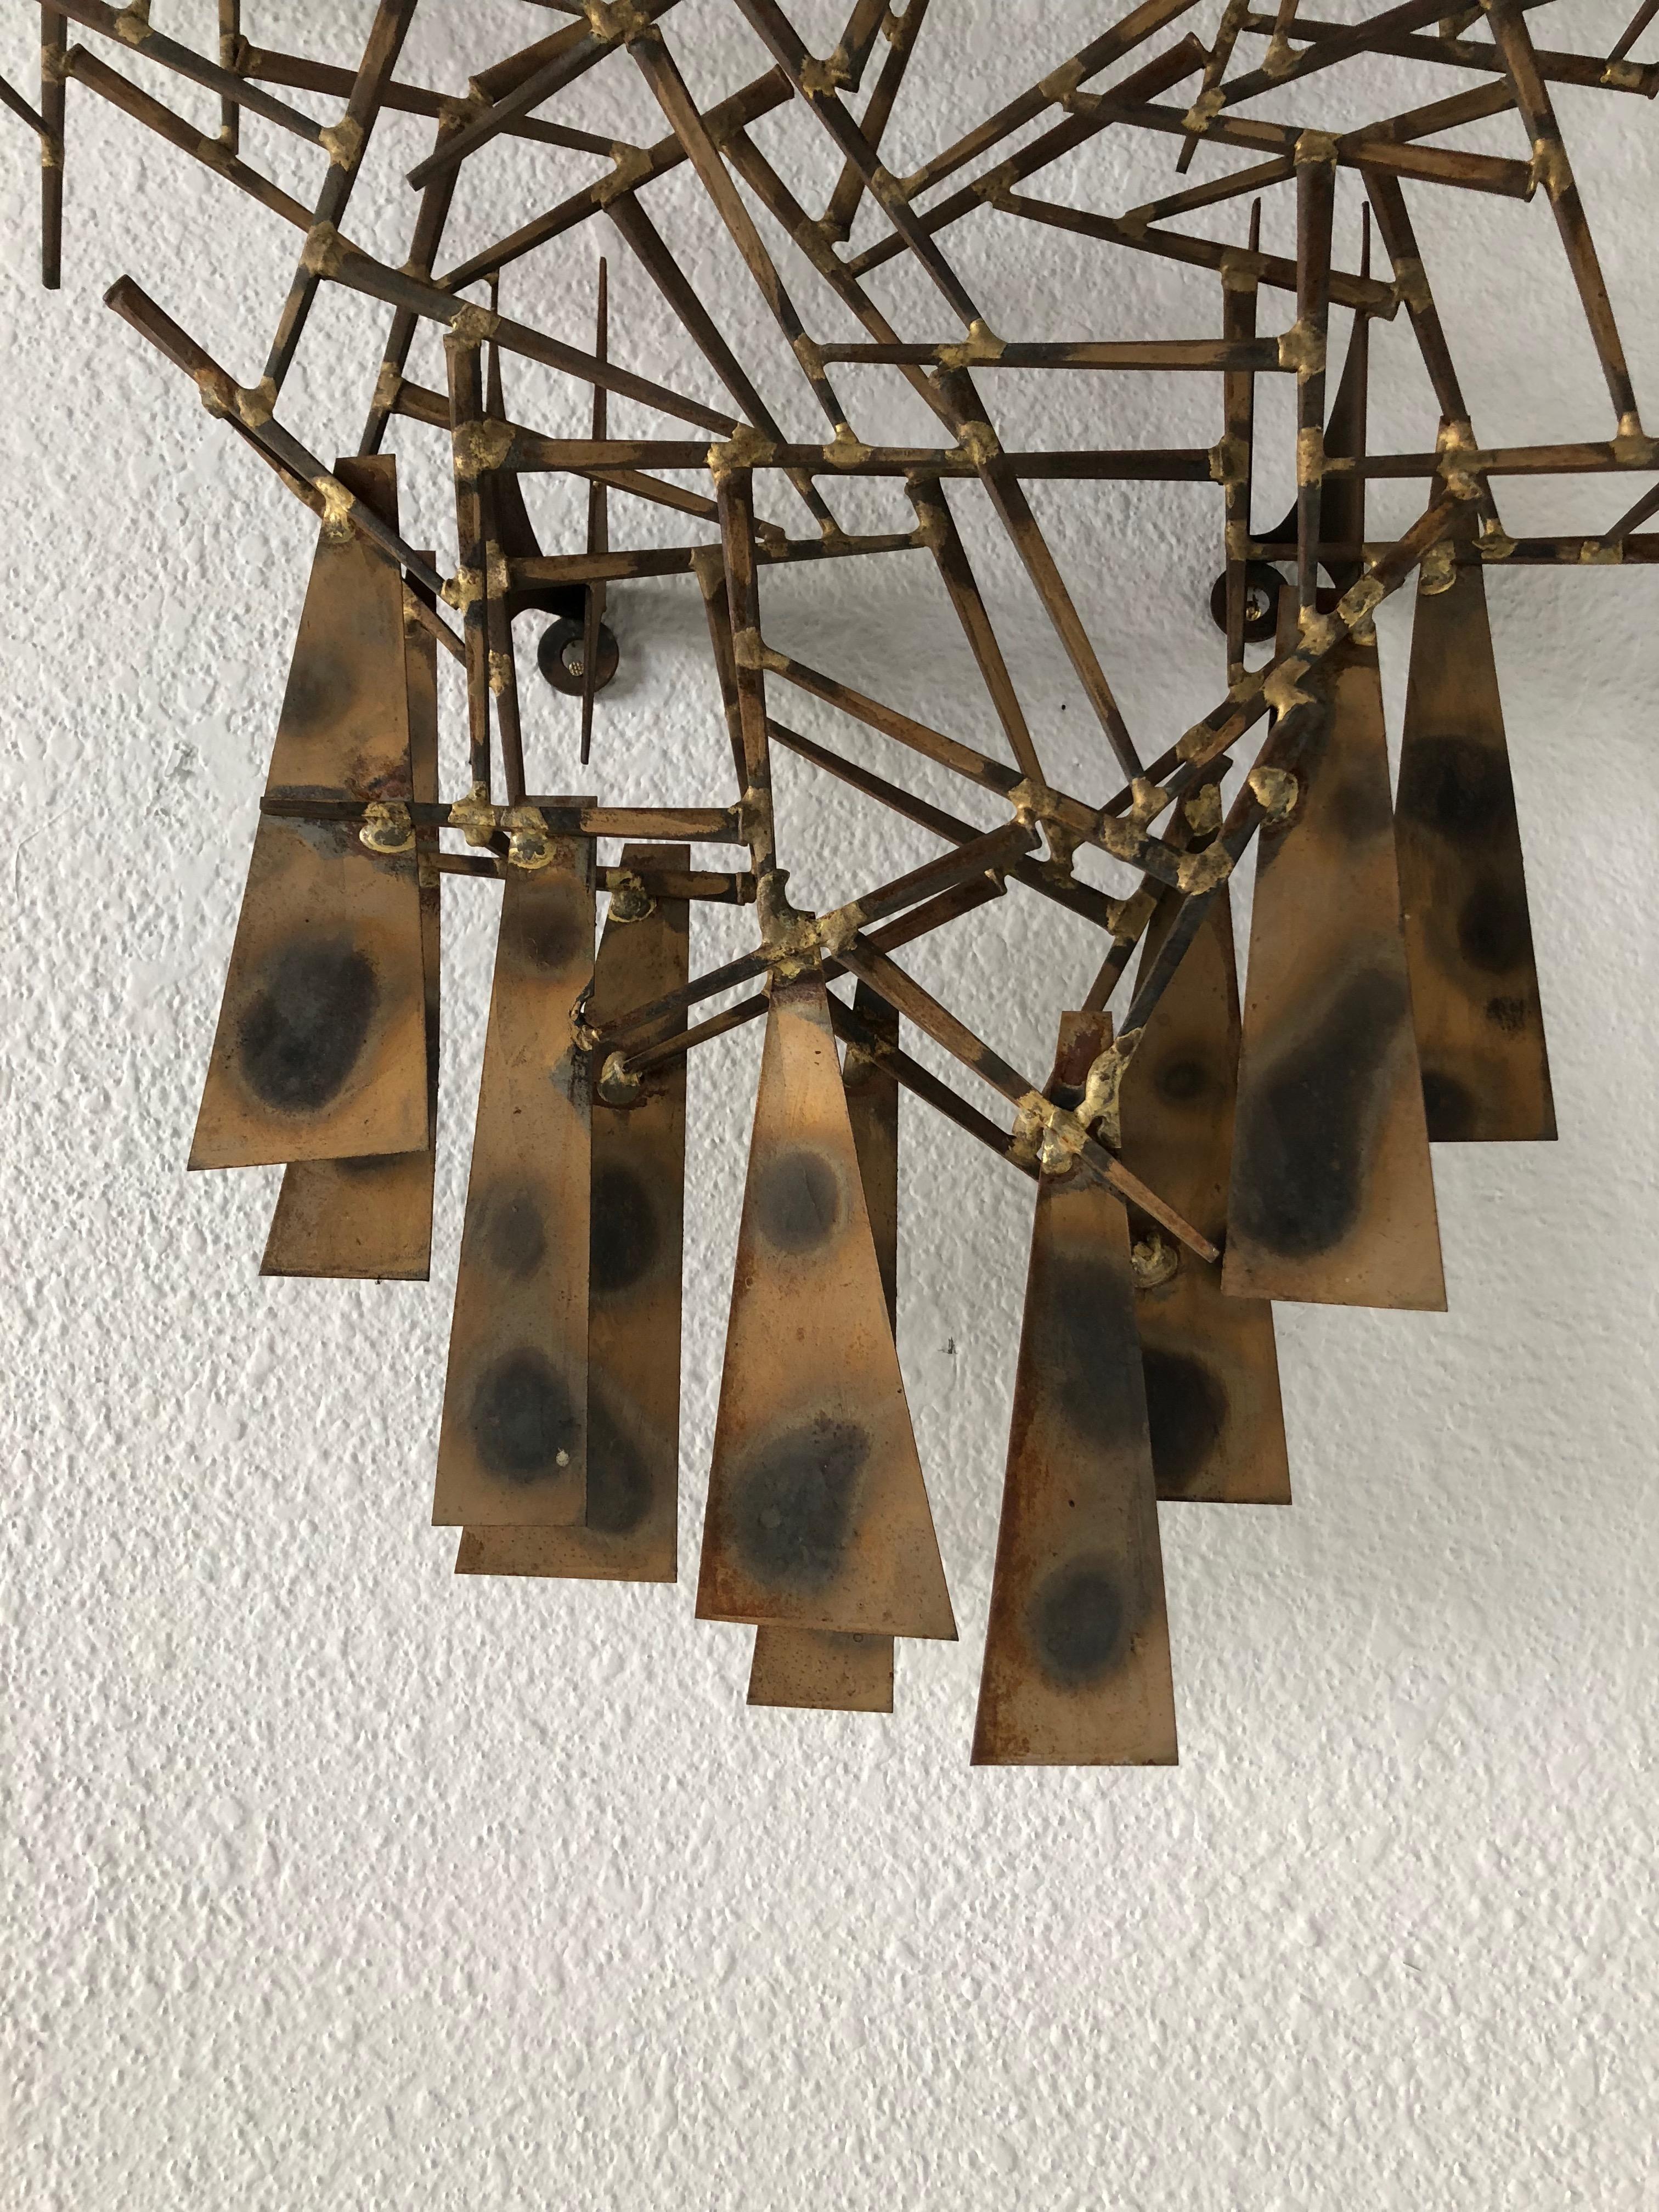 This handmade nailhead wall sculpture by Marc Weinstein of Marc Creates has nice brass and blackened finish to the metal and nails. There are four wall mounts and the sculpture could be mounted with the top up or down.